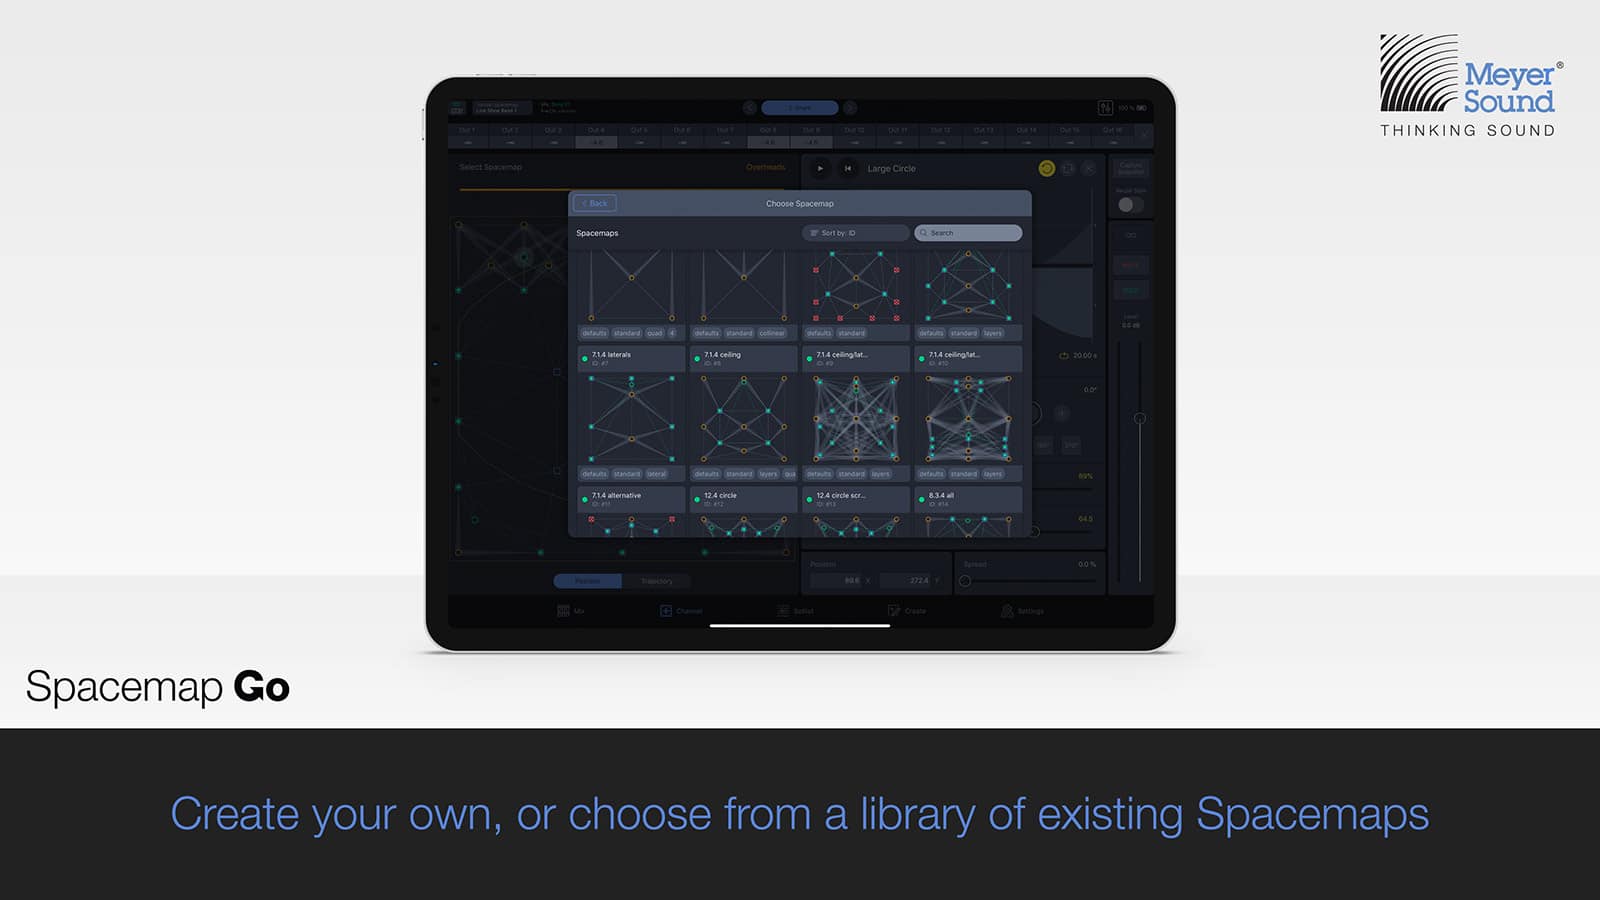 Meyer Sound Launches Spacemap Go, a Breakthrough Tool for Spatial Sound Design and Mixing